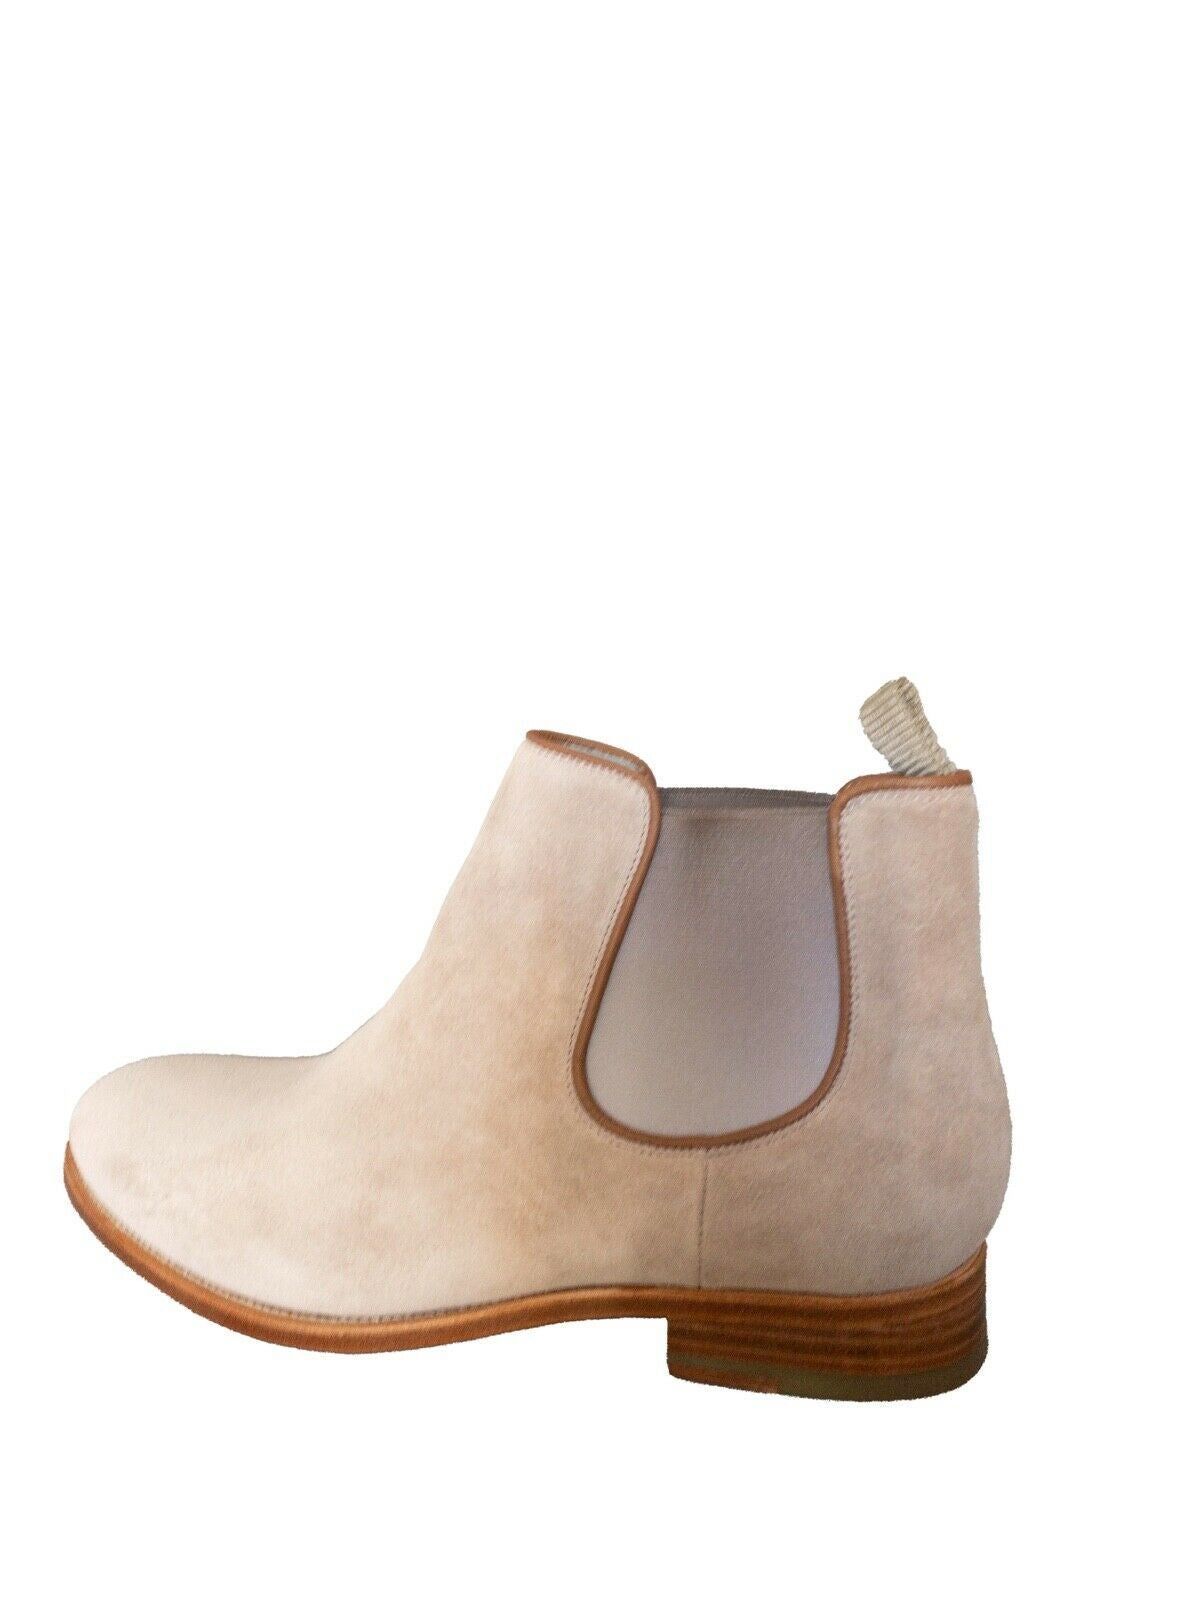 Paradigma Blake System Real Leather Contrast Chelsea Boot RRP £125